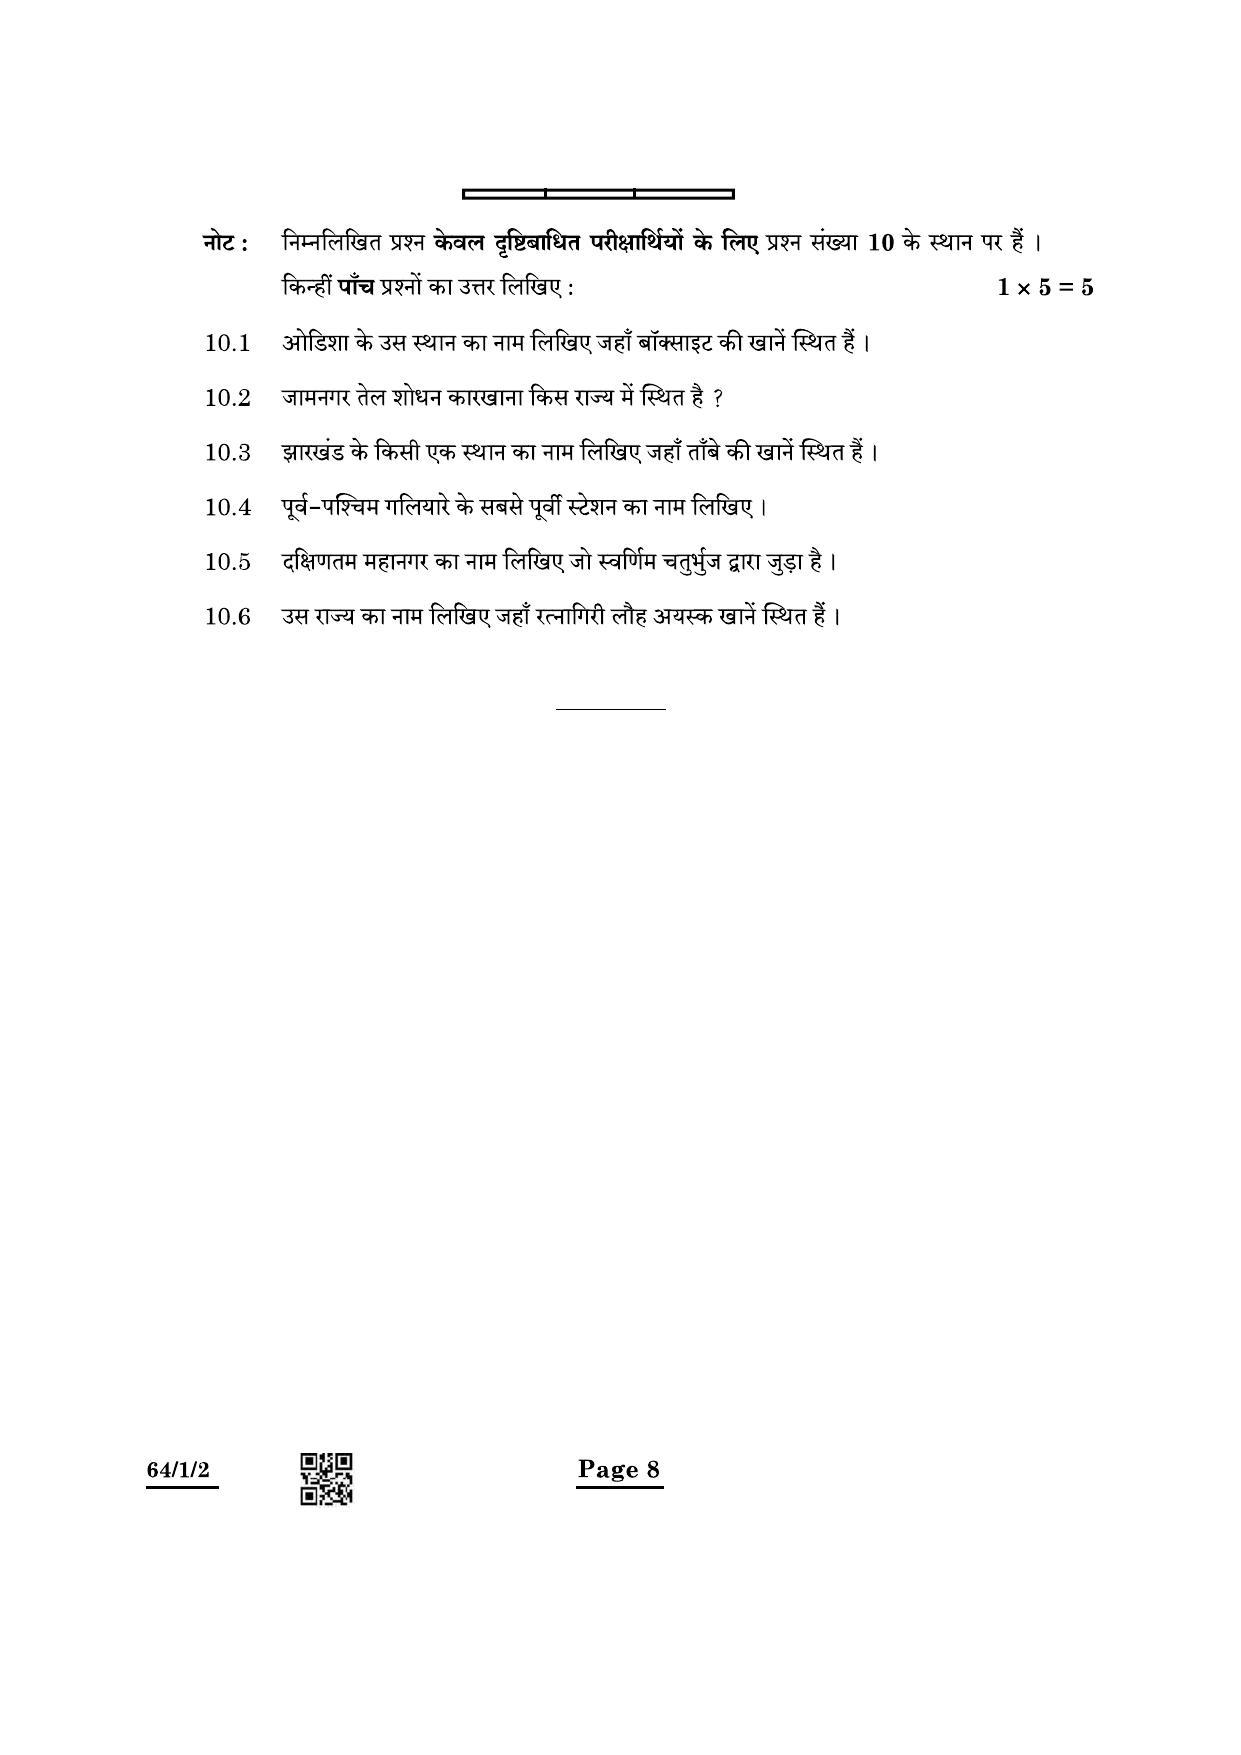 CBSE Class 12 64-1-2 Geography 2022 Question Paper - Page 8